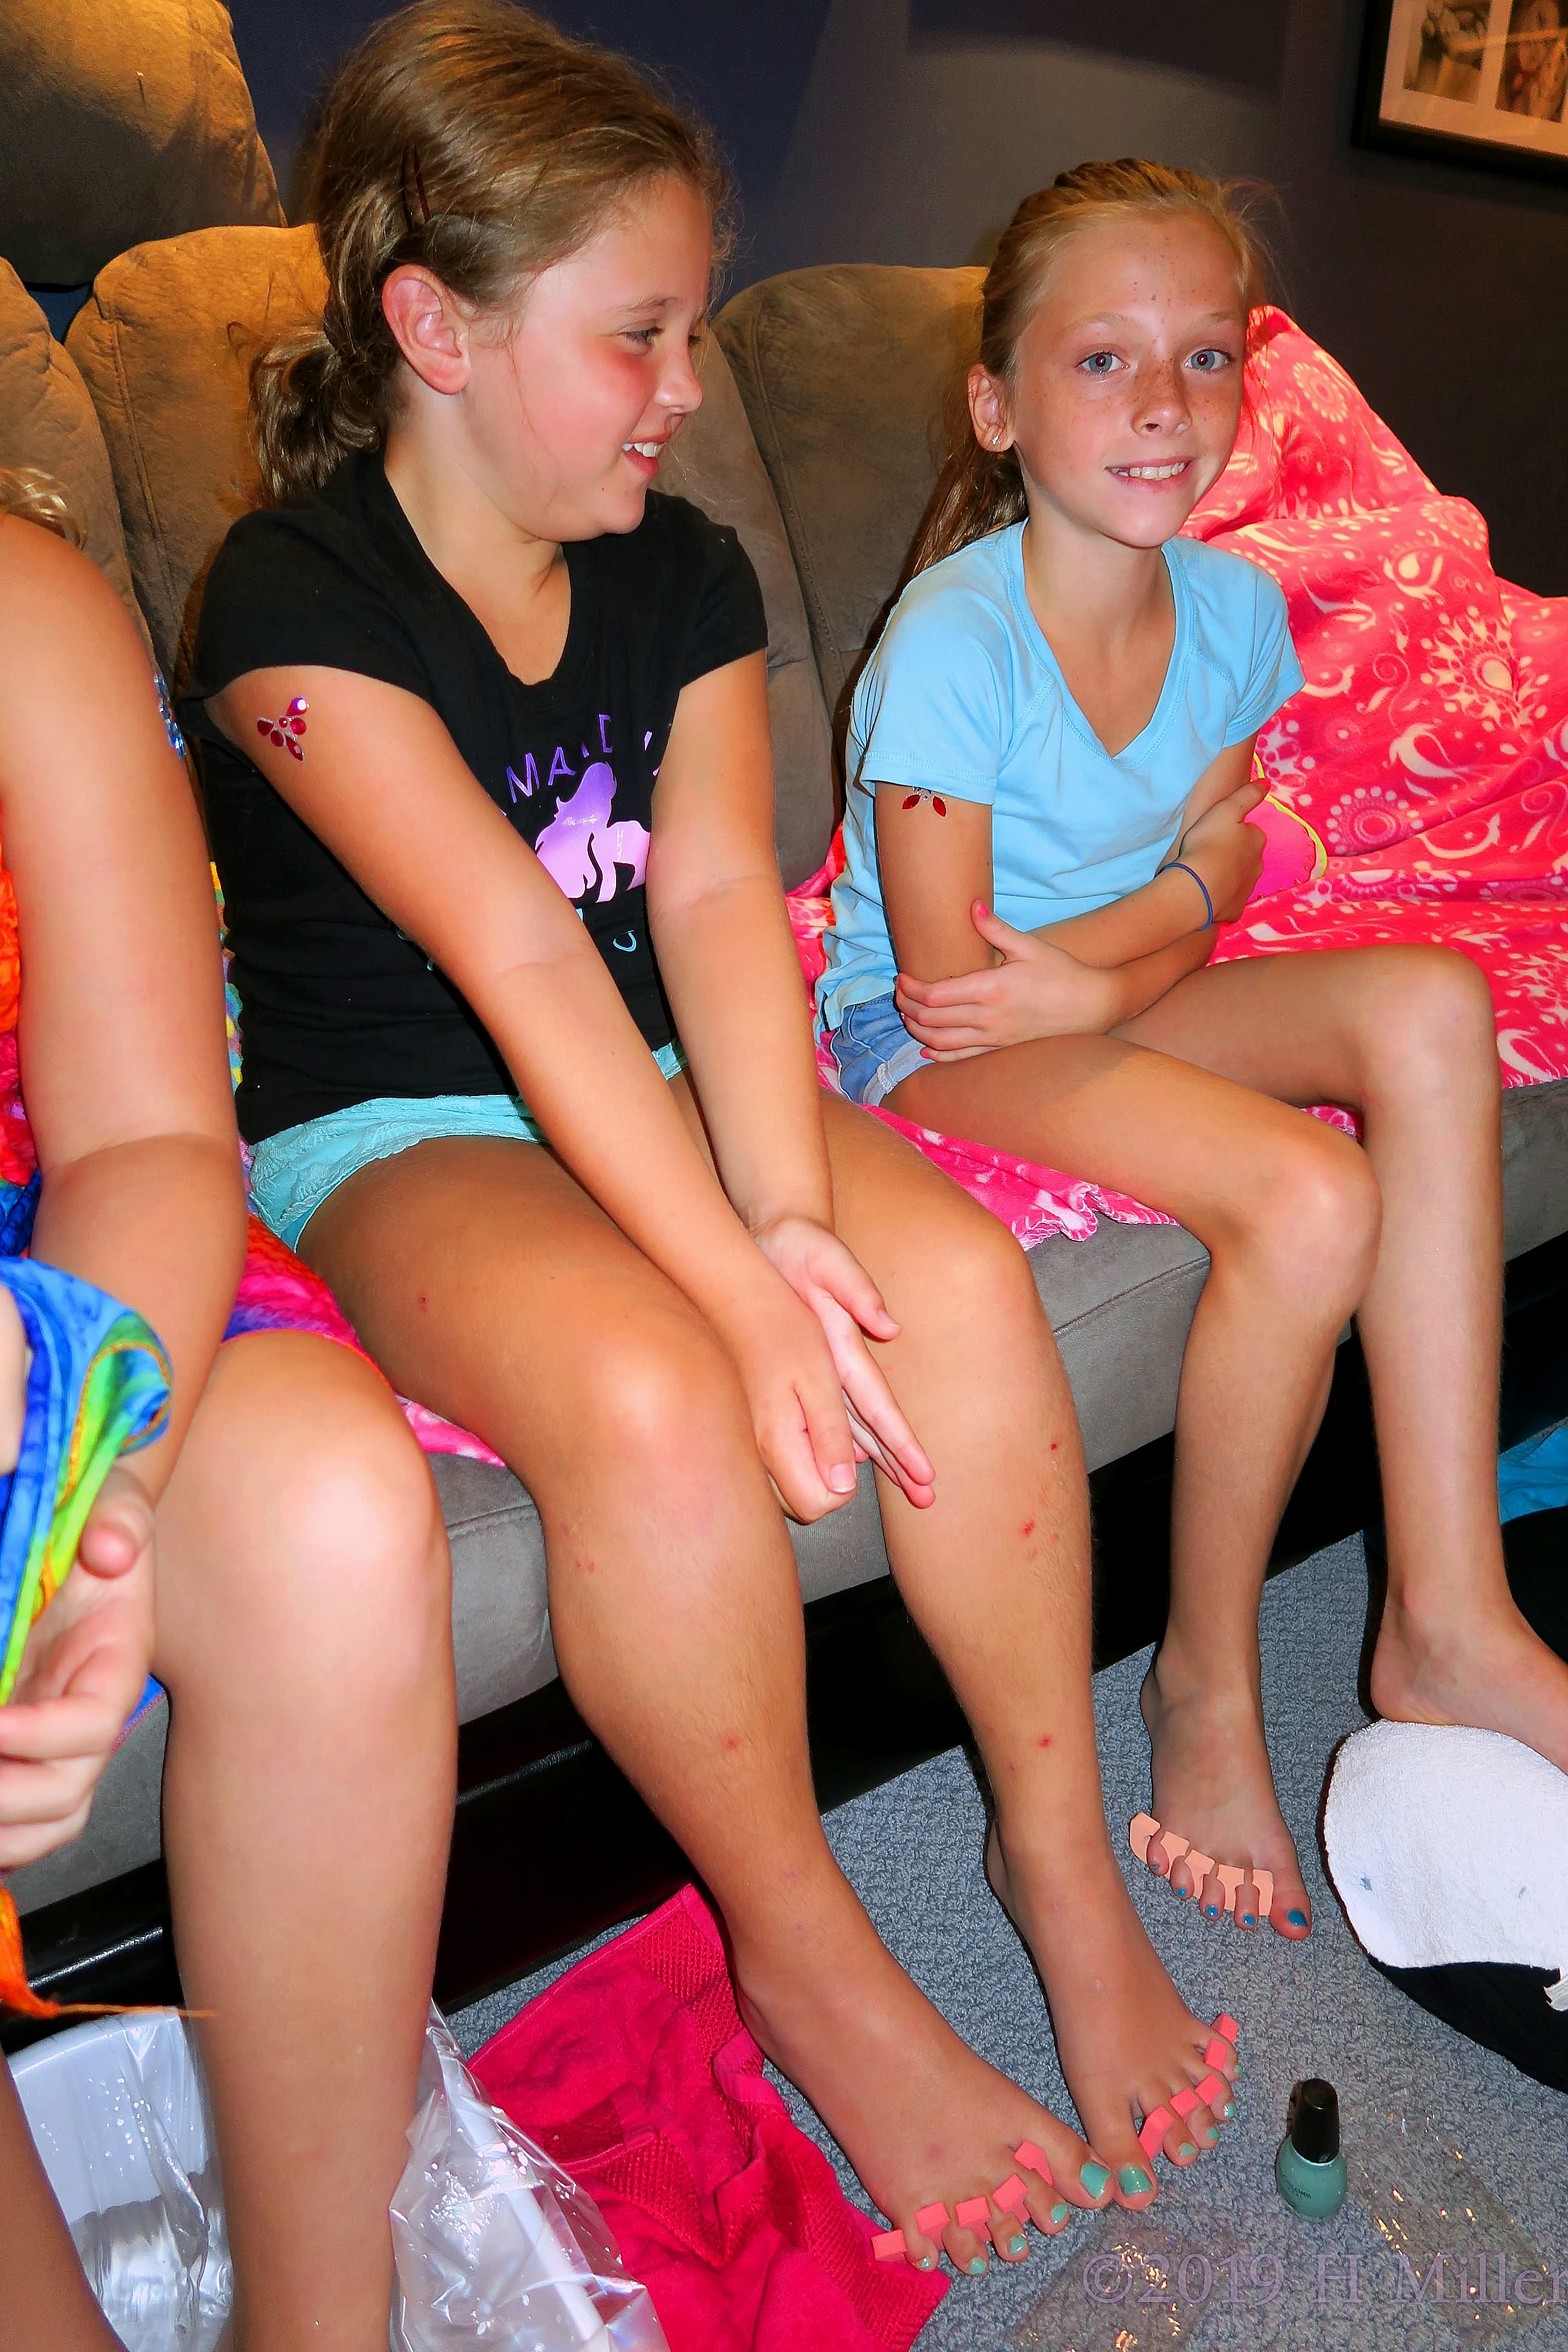 Delighted Duo! Kids Pedicures With Friends! 